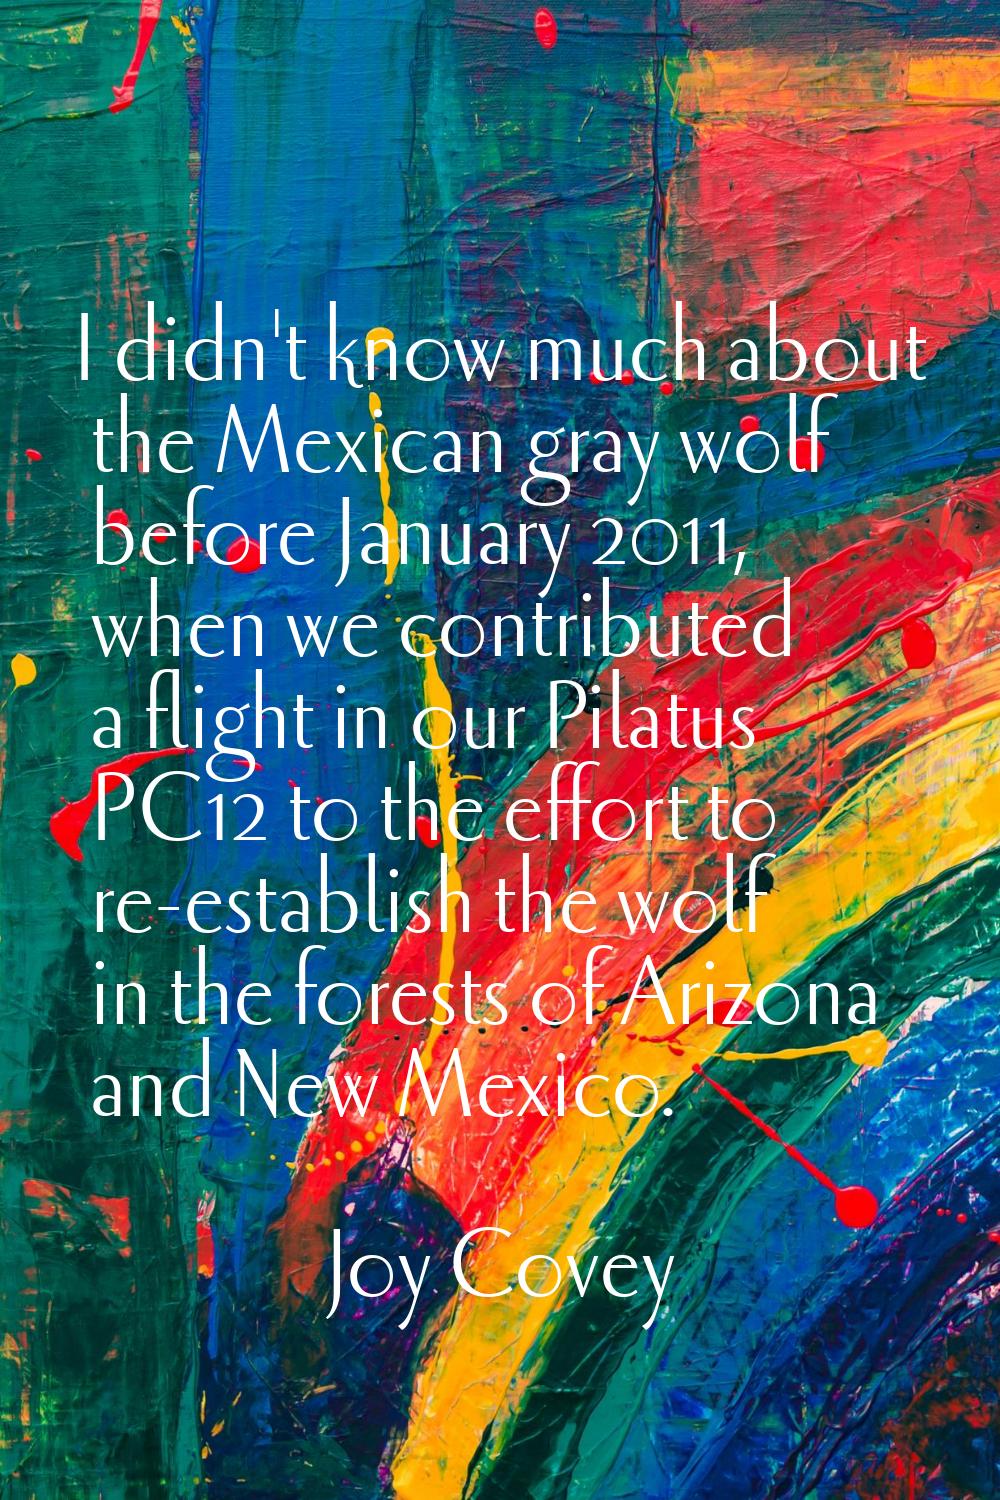 I didn't know much about the Mexican gray wolf before January 2011, when we contributed a flight in